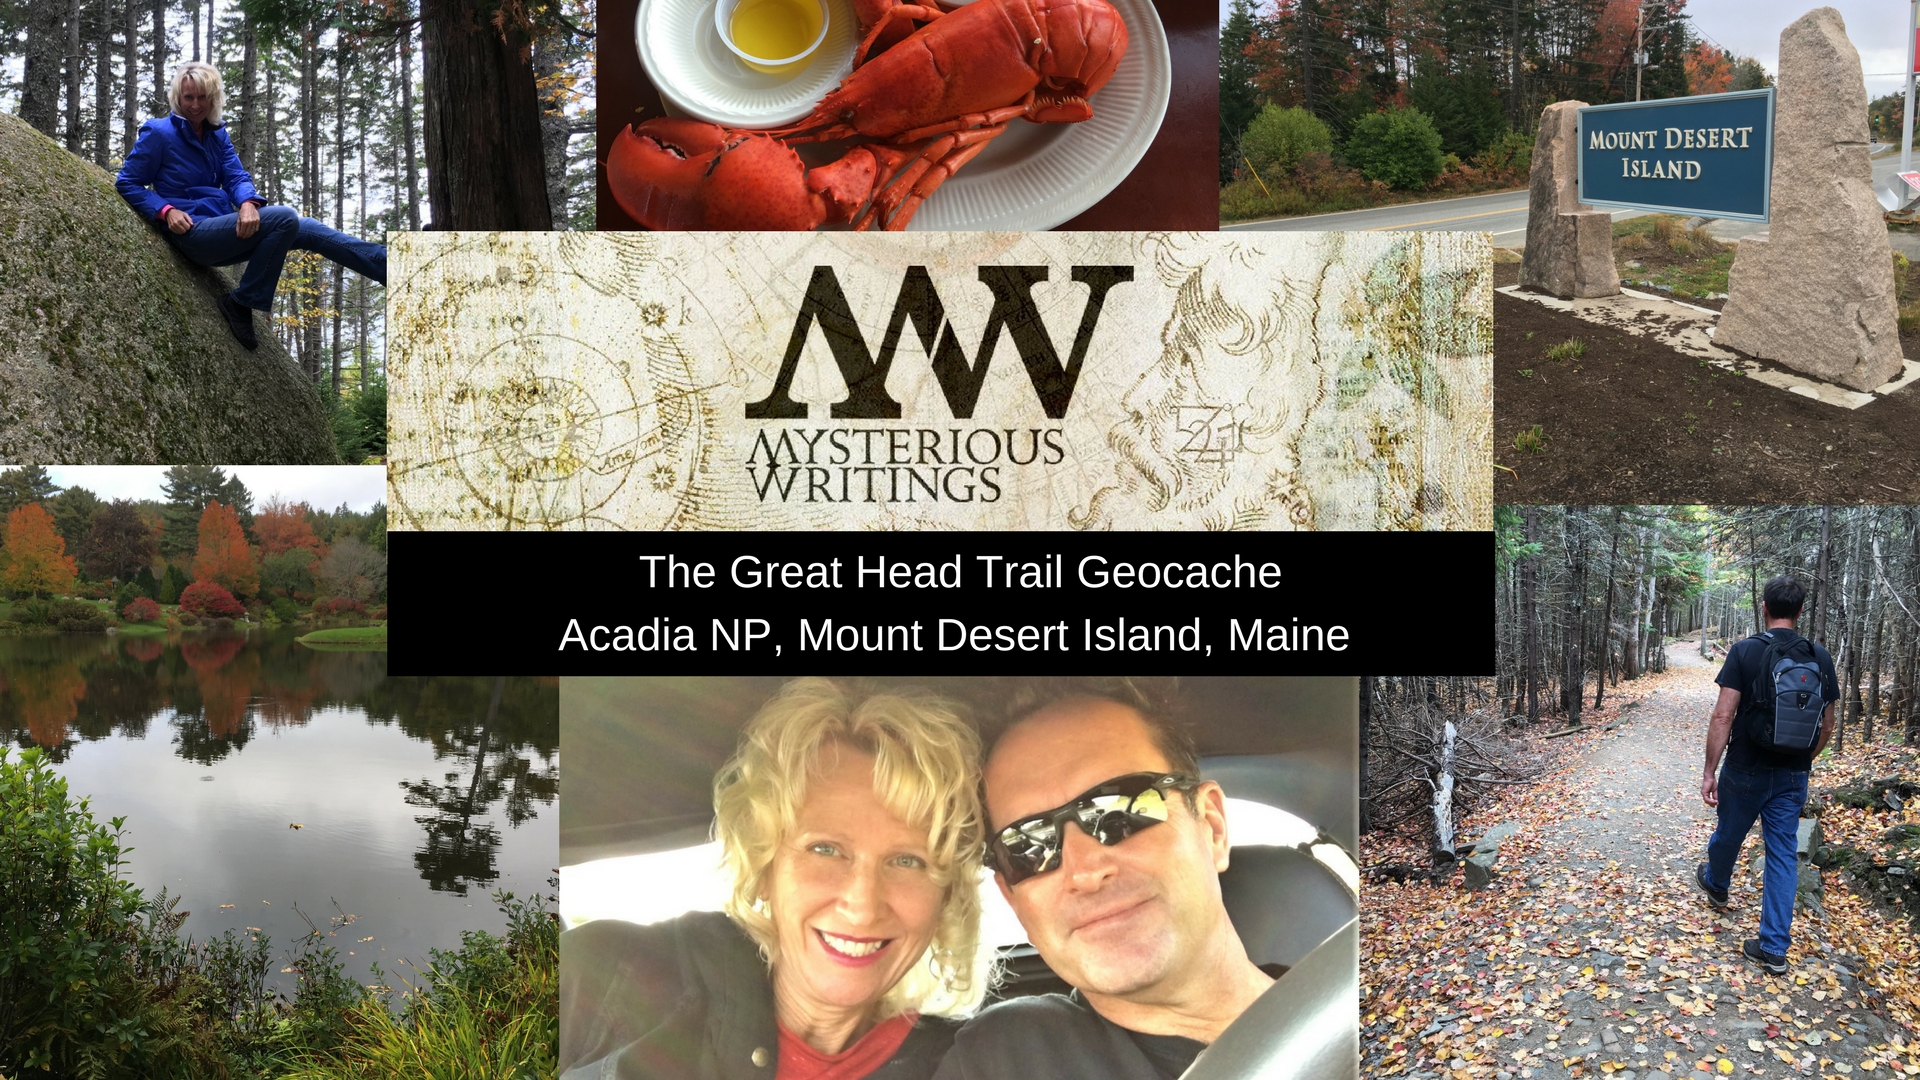 The Geocache and Cave on Great Head Trail on Mount Desert Island, Maine